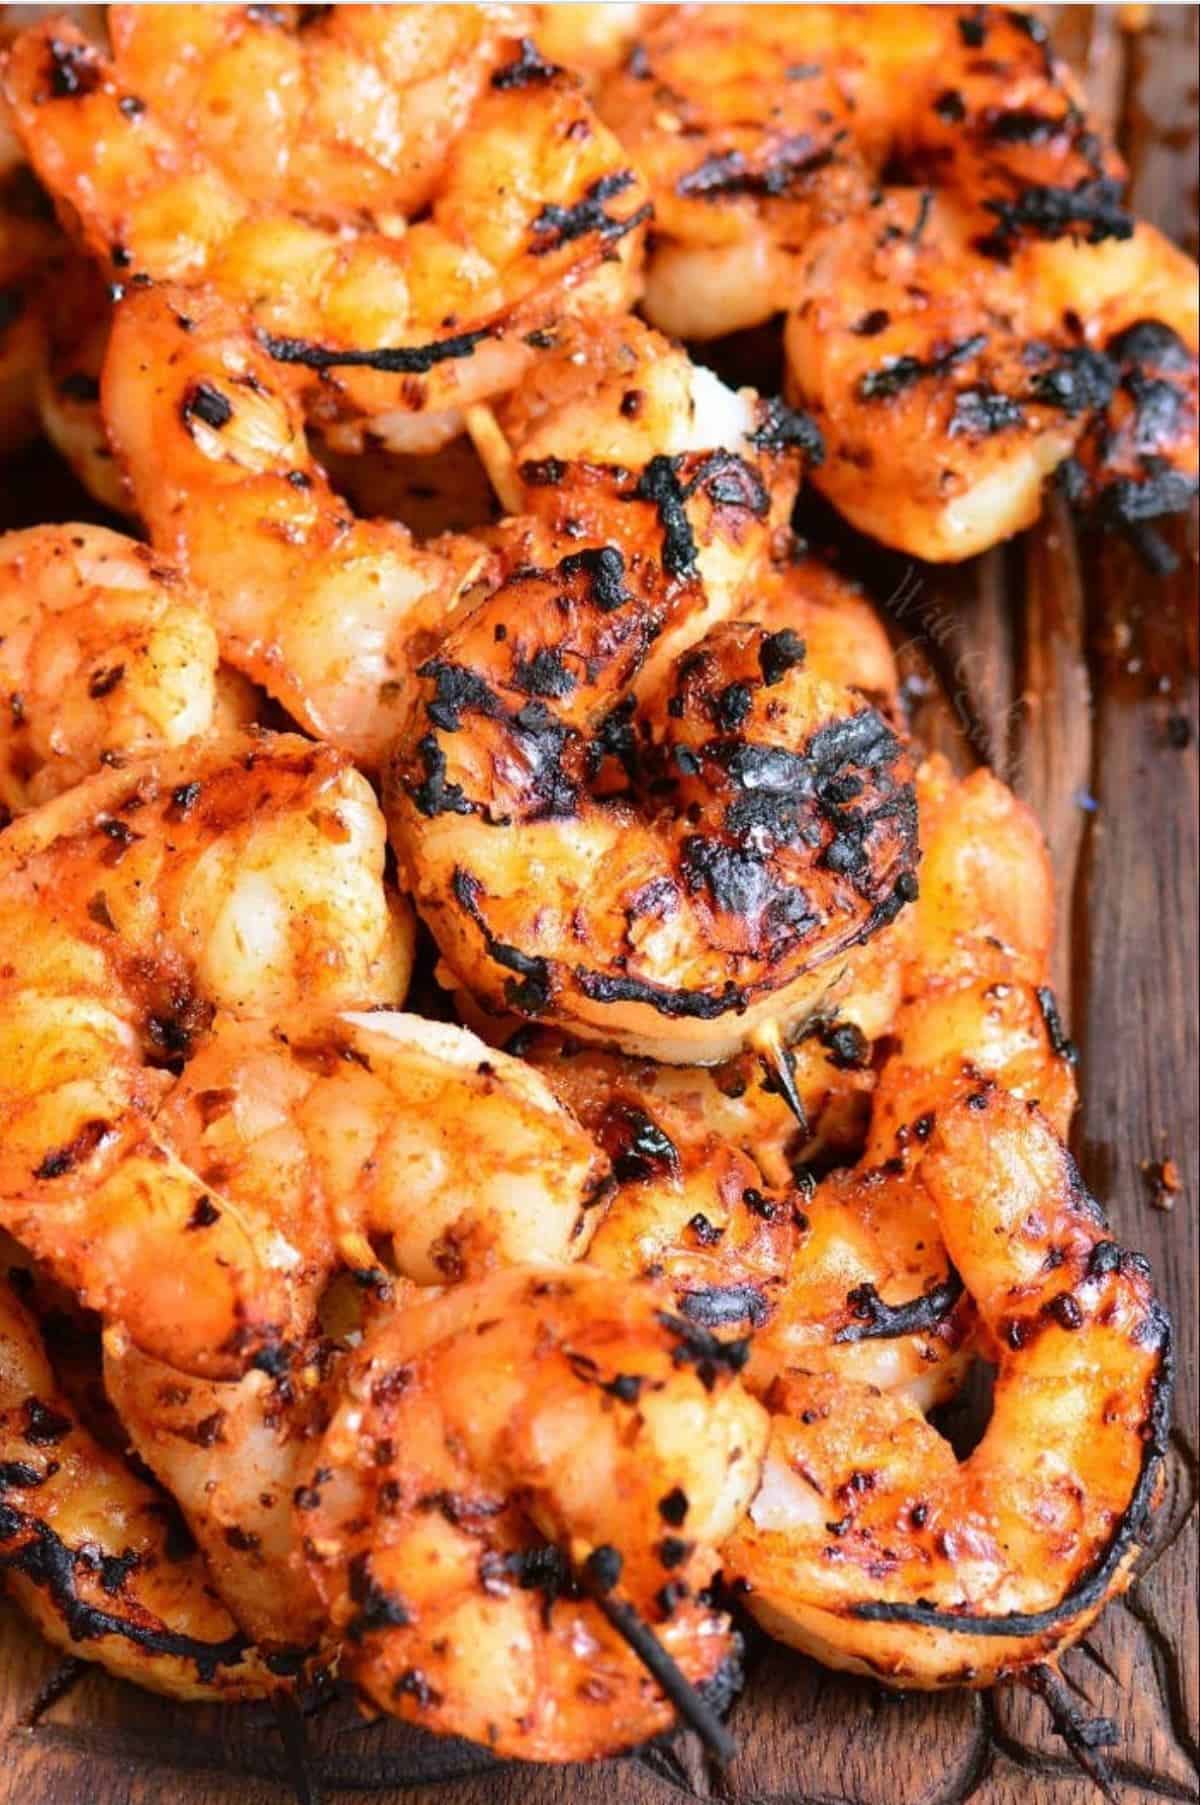 grilled shrimp on skewers are placed in a small pile 